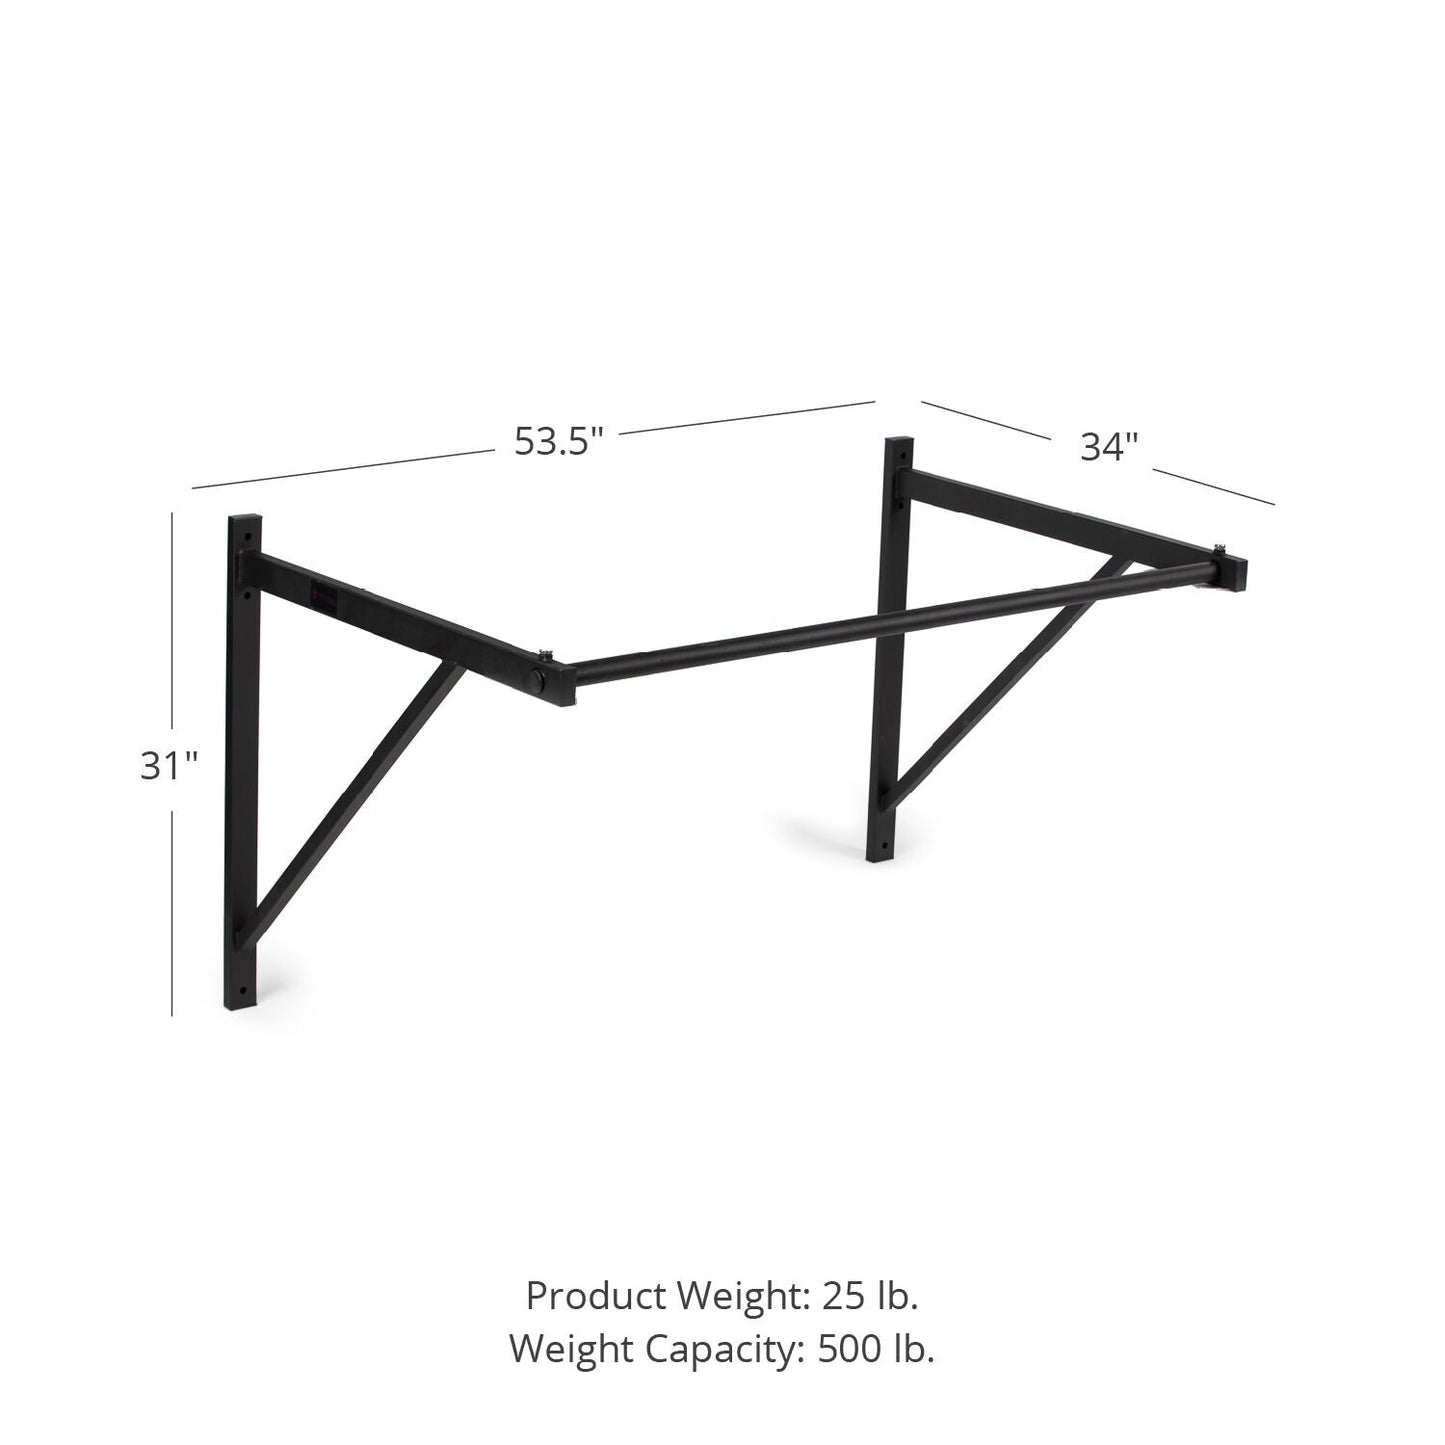 Wall-Mounted Pull-Up Bar - view 8